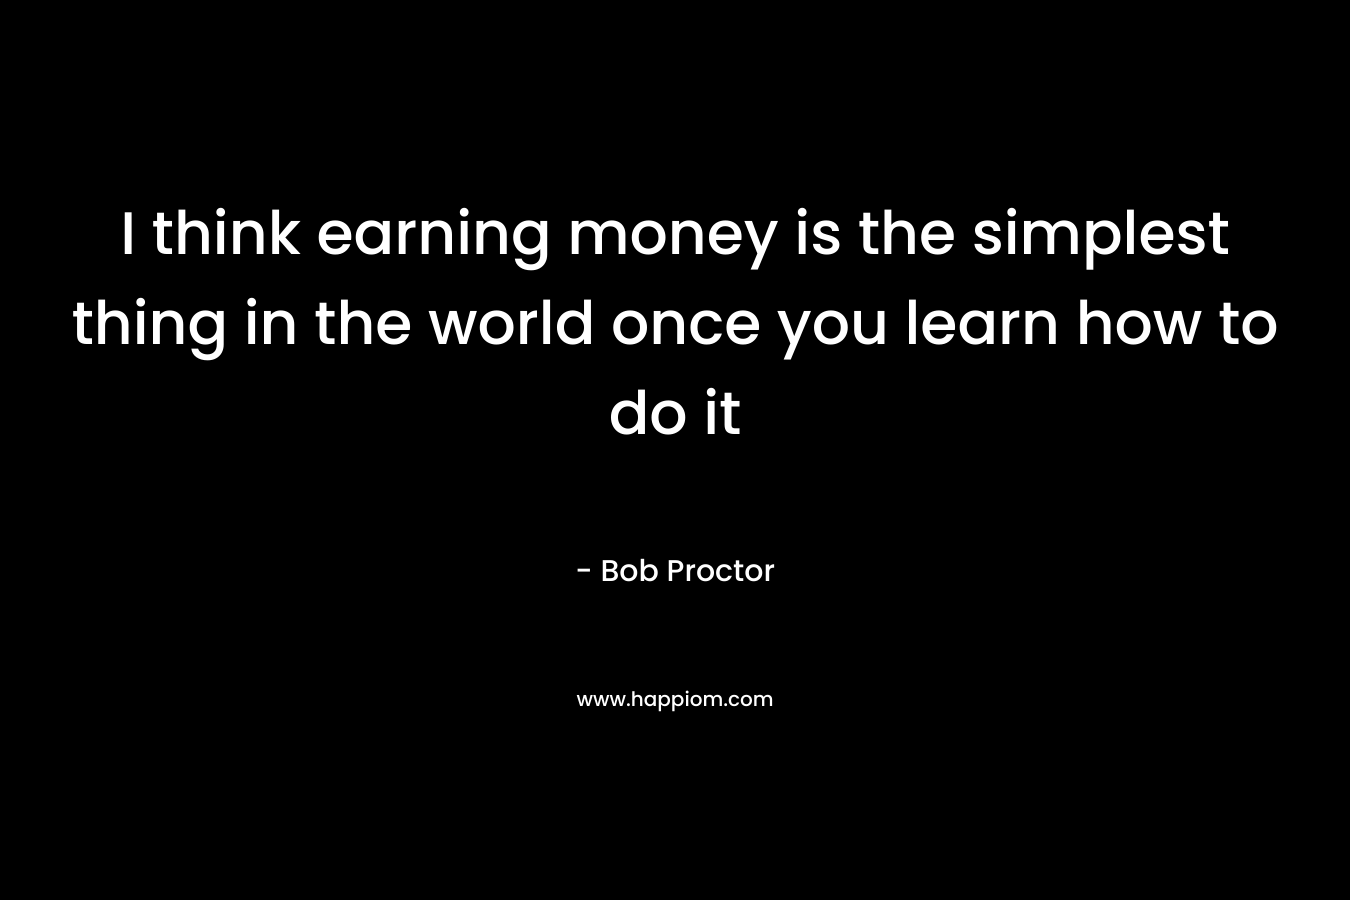 I think earning money is the simplest thing in the world once you learn how to do it – Bob Proctor